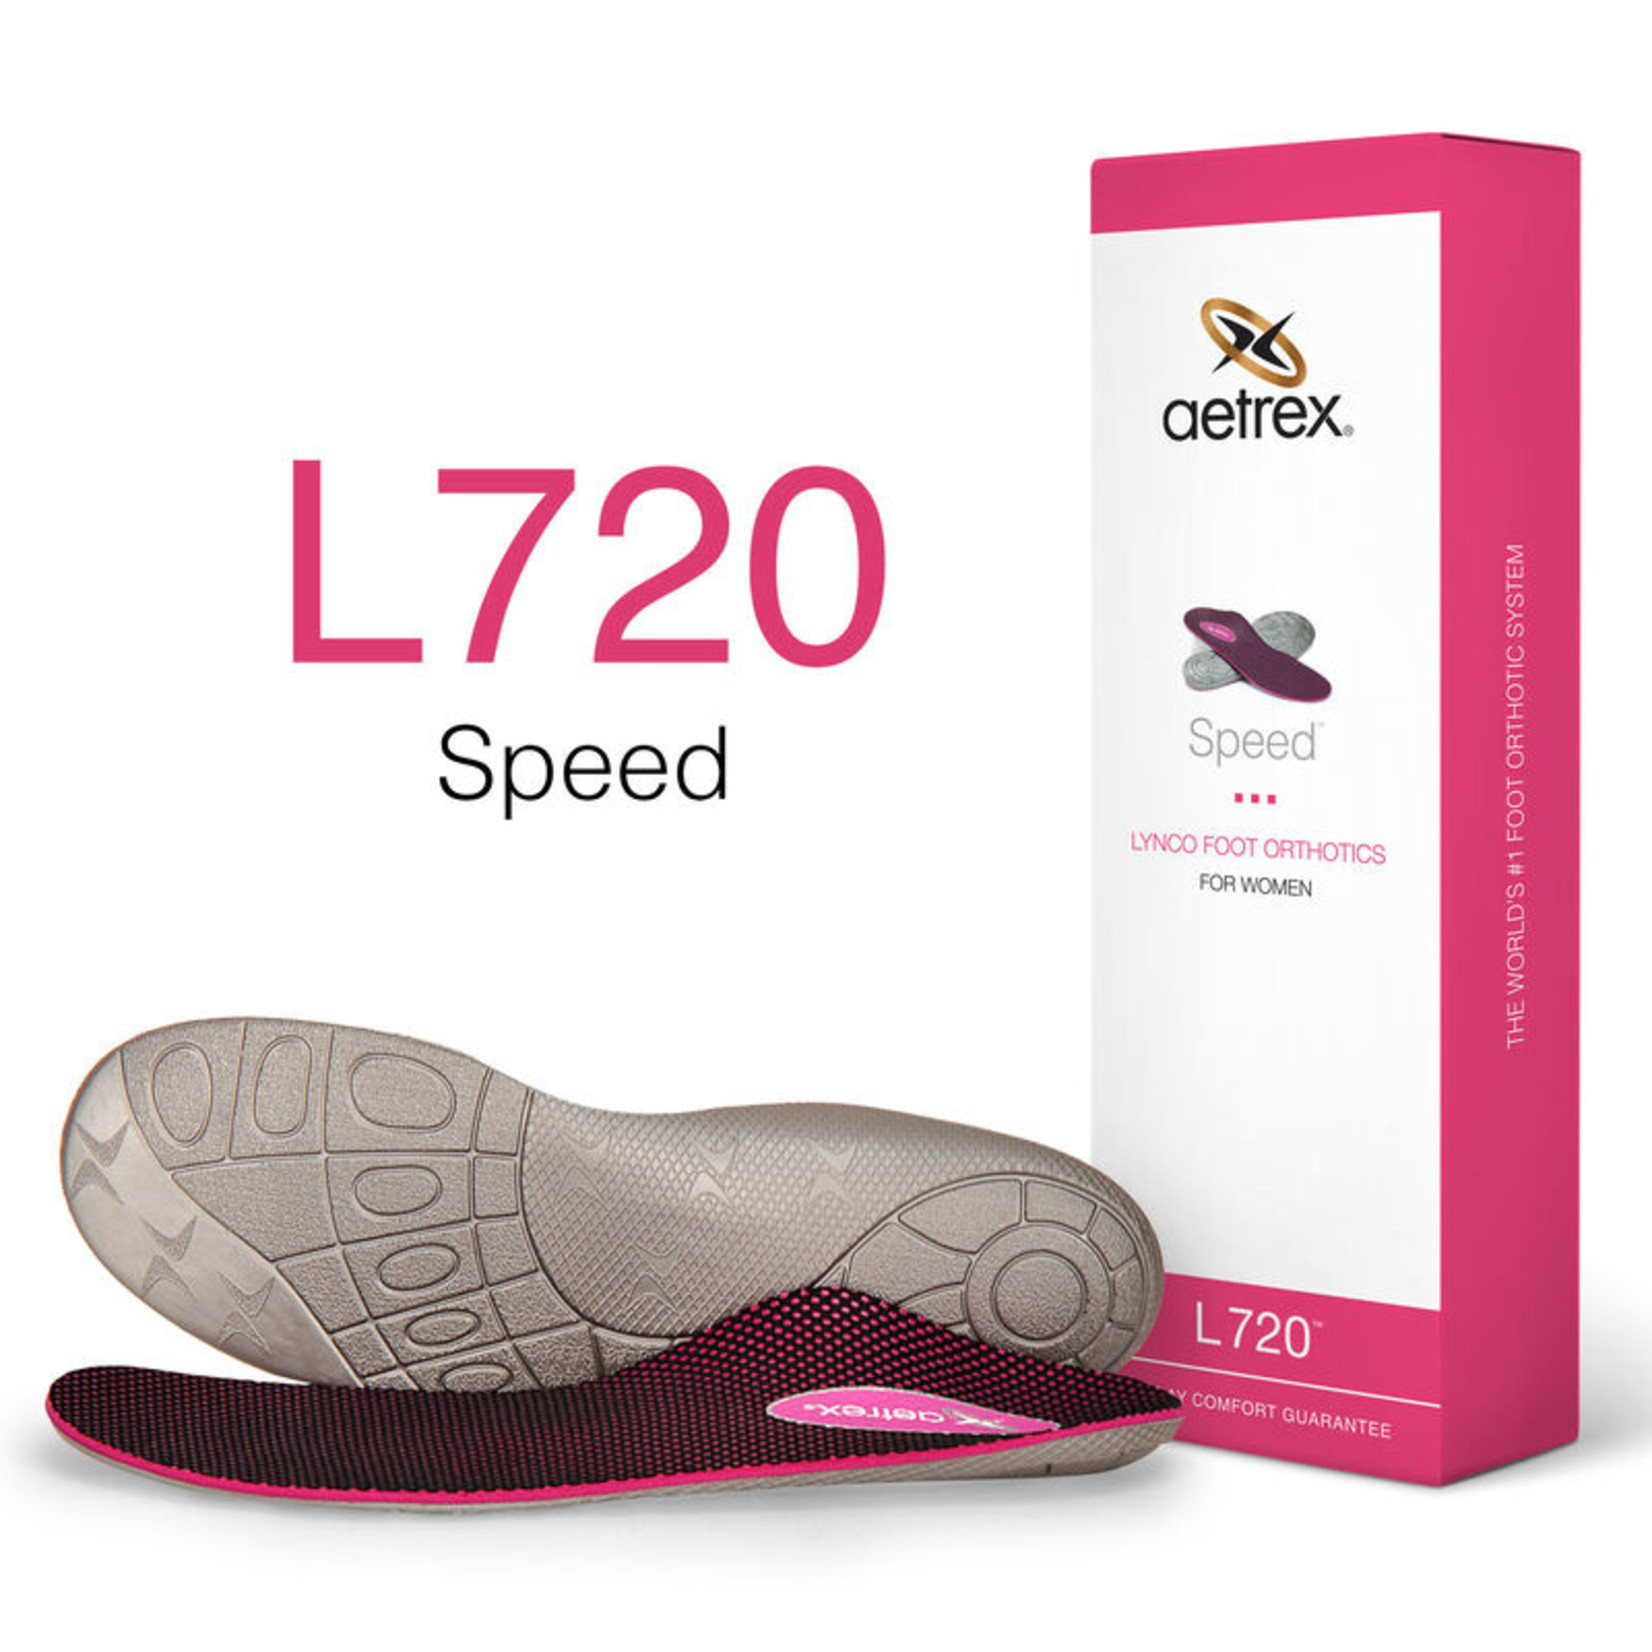 Aetrex Women's Speed Posted Orthotics